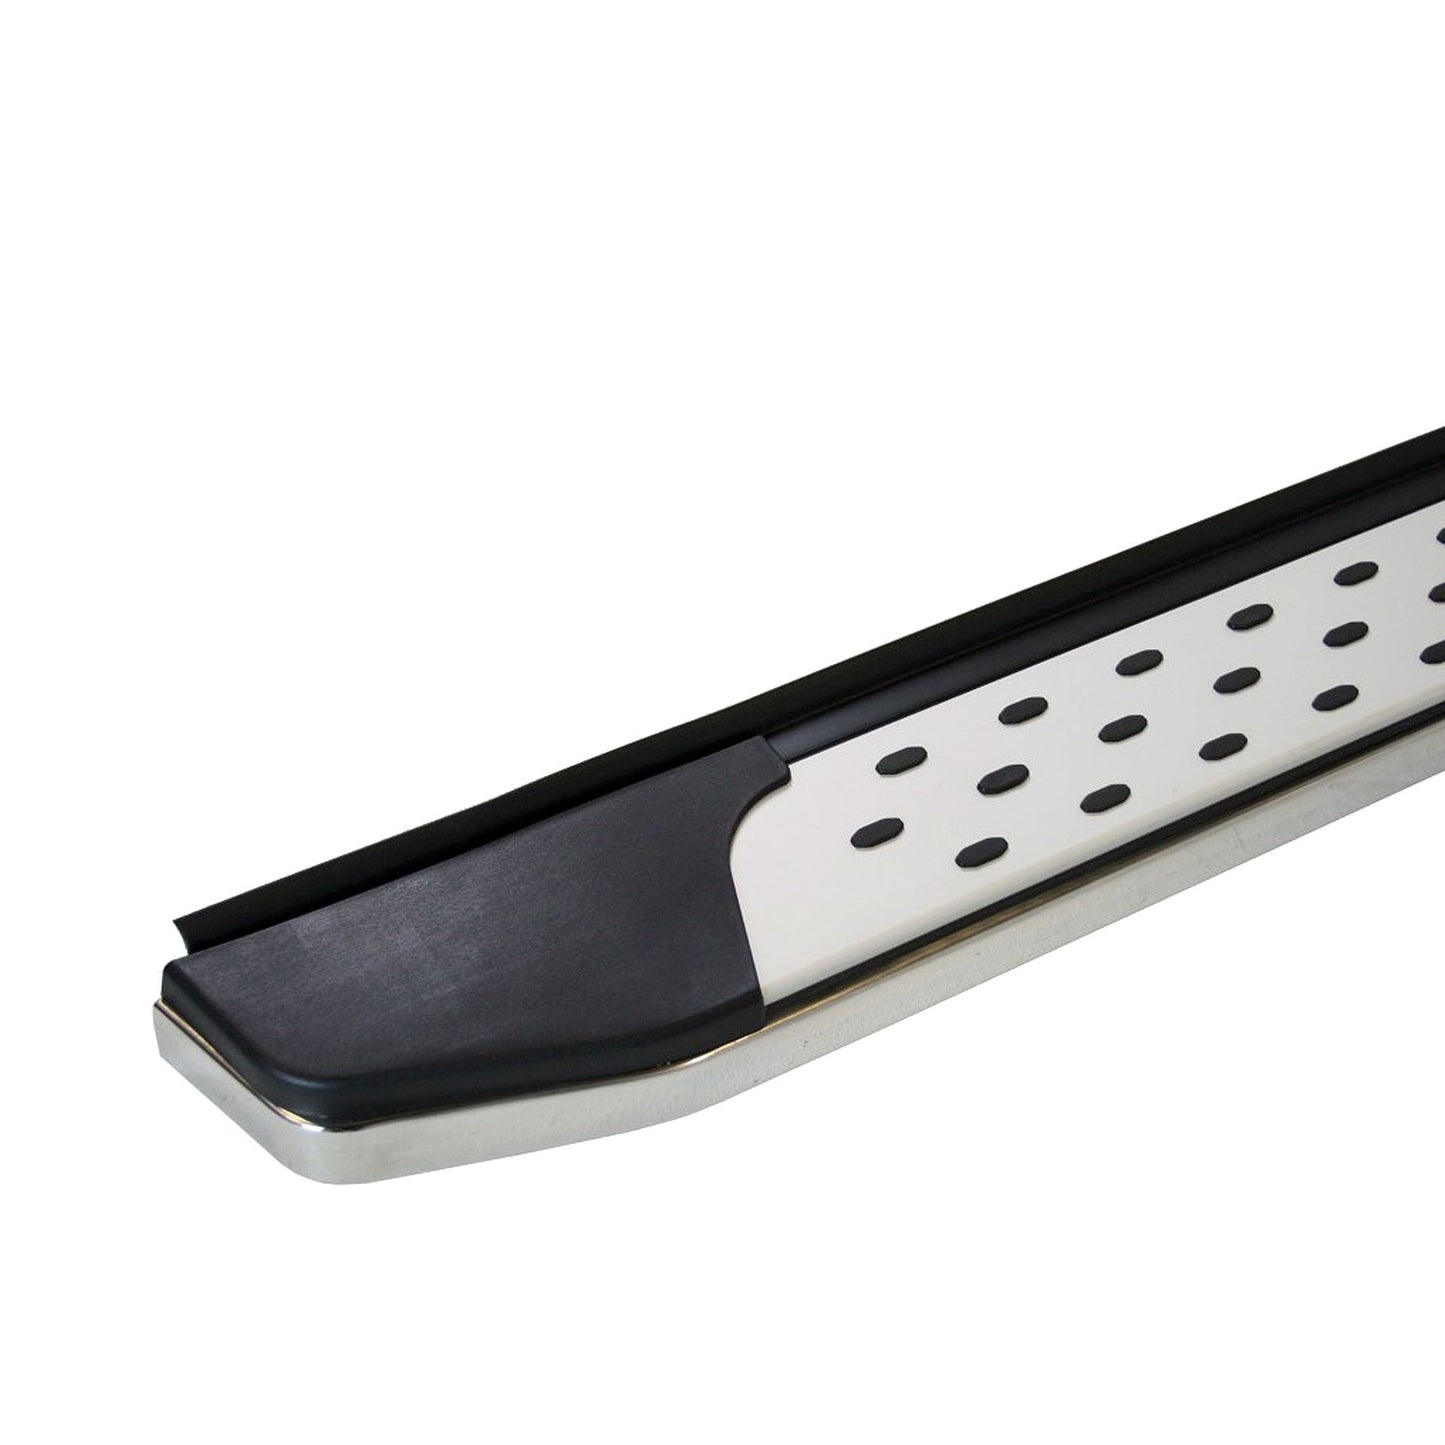 Freedom Side Steps Running Boards for BMW X4 2014+ (inc. M Sport Models) -  - sold by Direct4x4